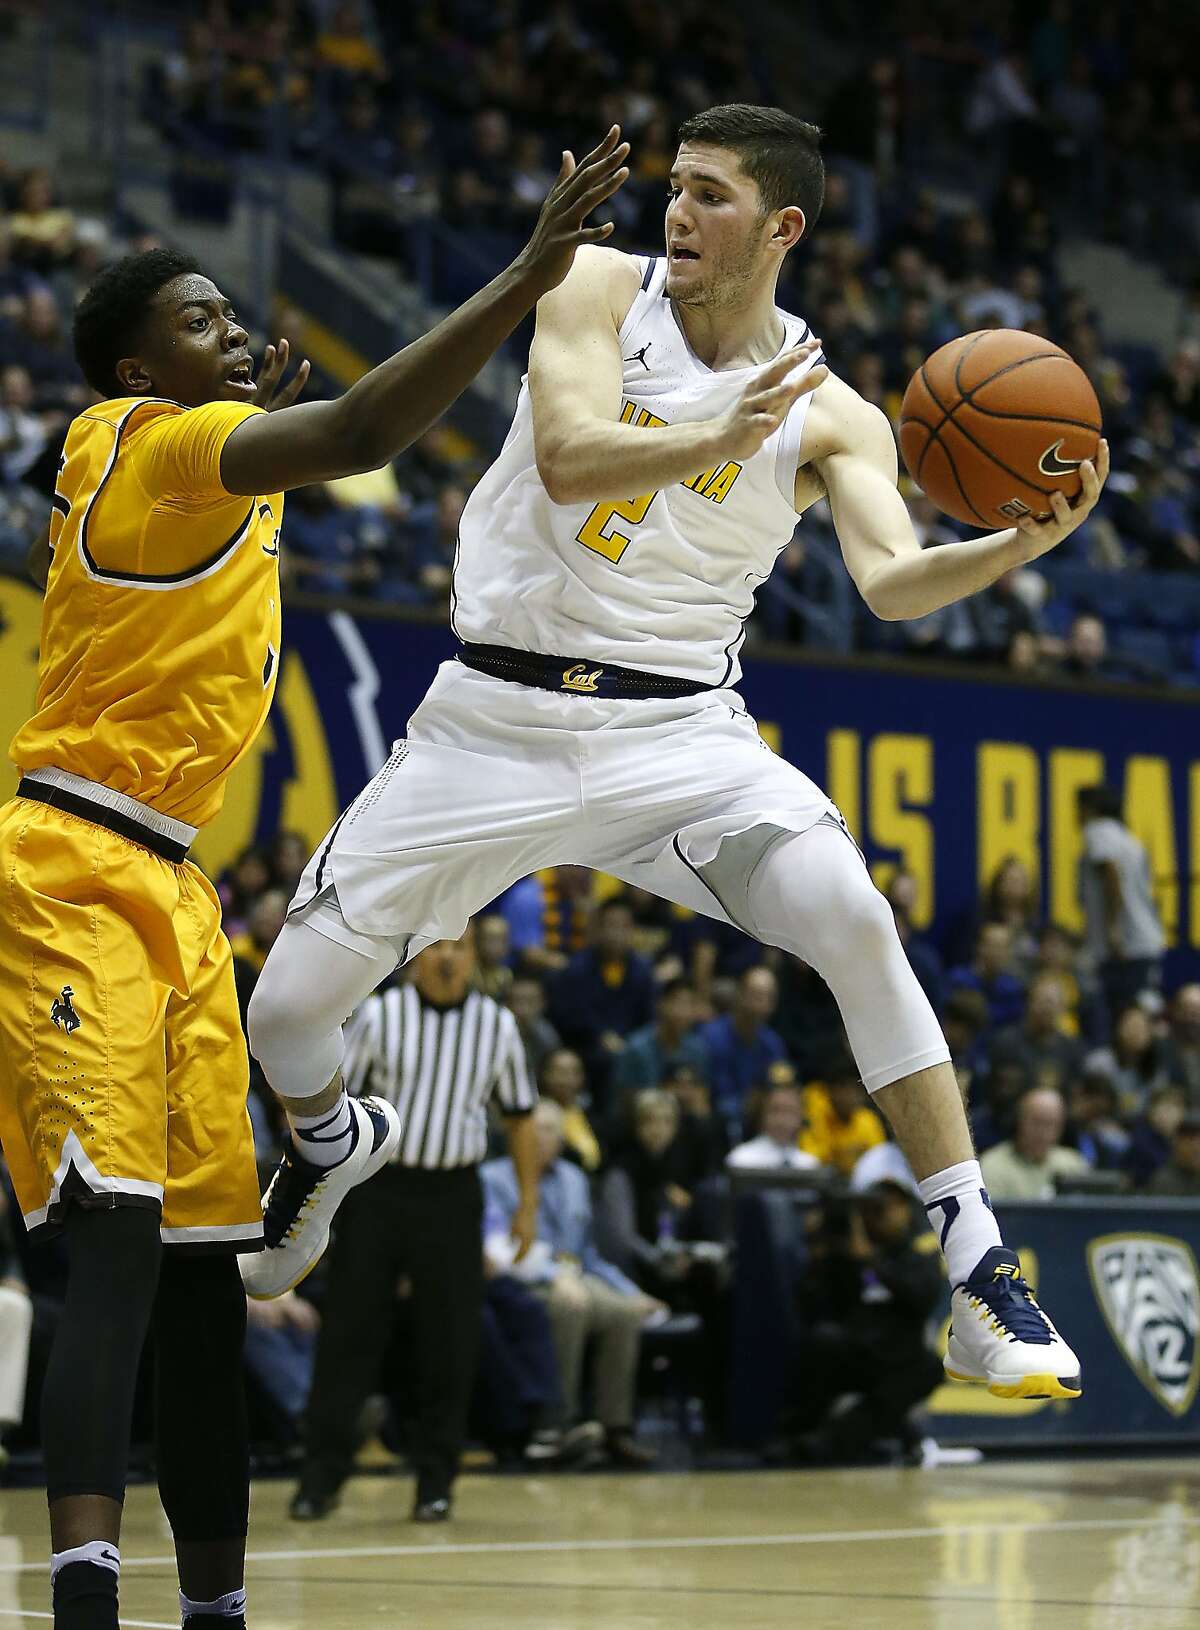 California guard Sam Singer (2) looks to pass the ball as Wyoming forward Alan Herndon defends during the second half of an NCAA college basketball game Friday, Nov. 25, 2016, in Berkeley, Calif. California won 71-61. (AP Photo/Tony Avelar)